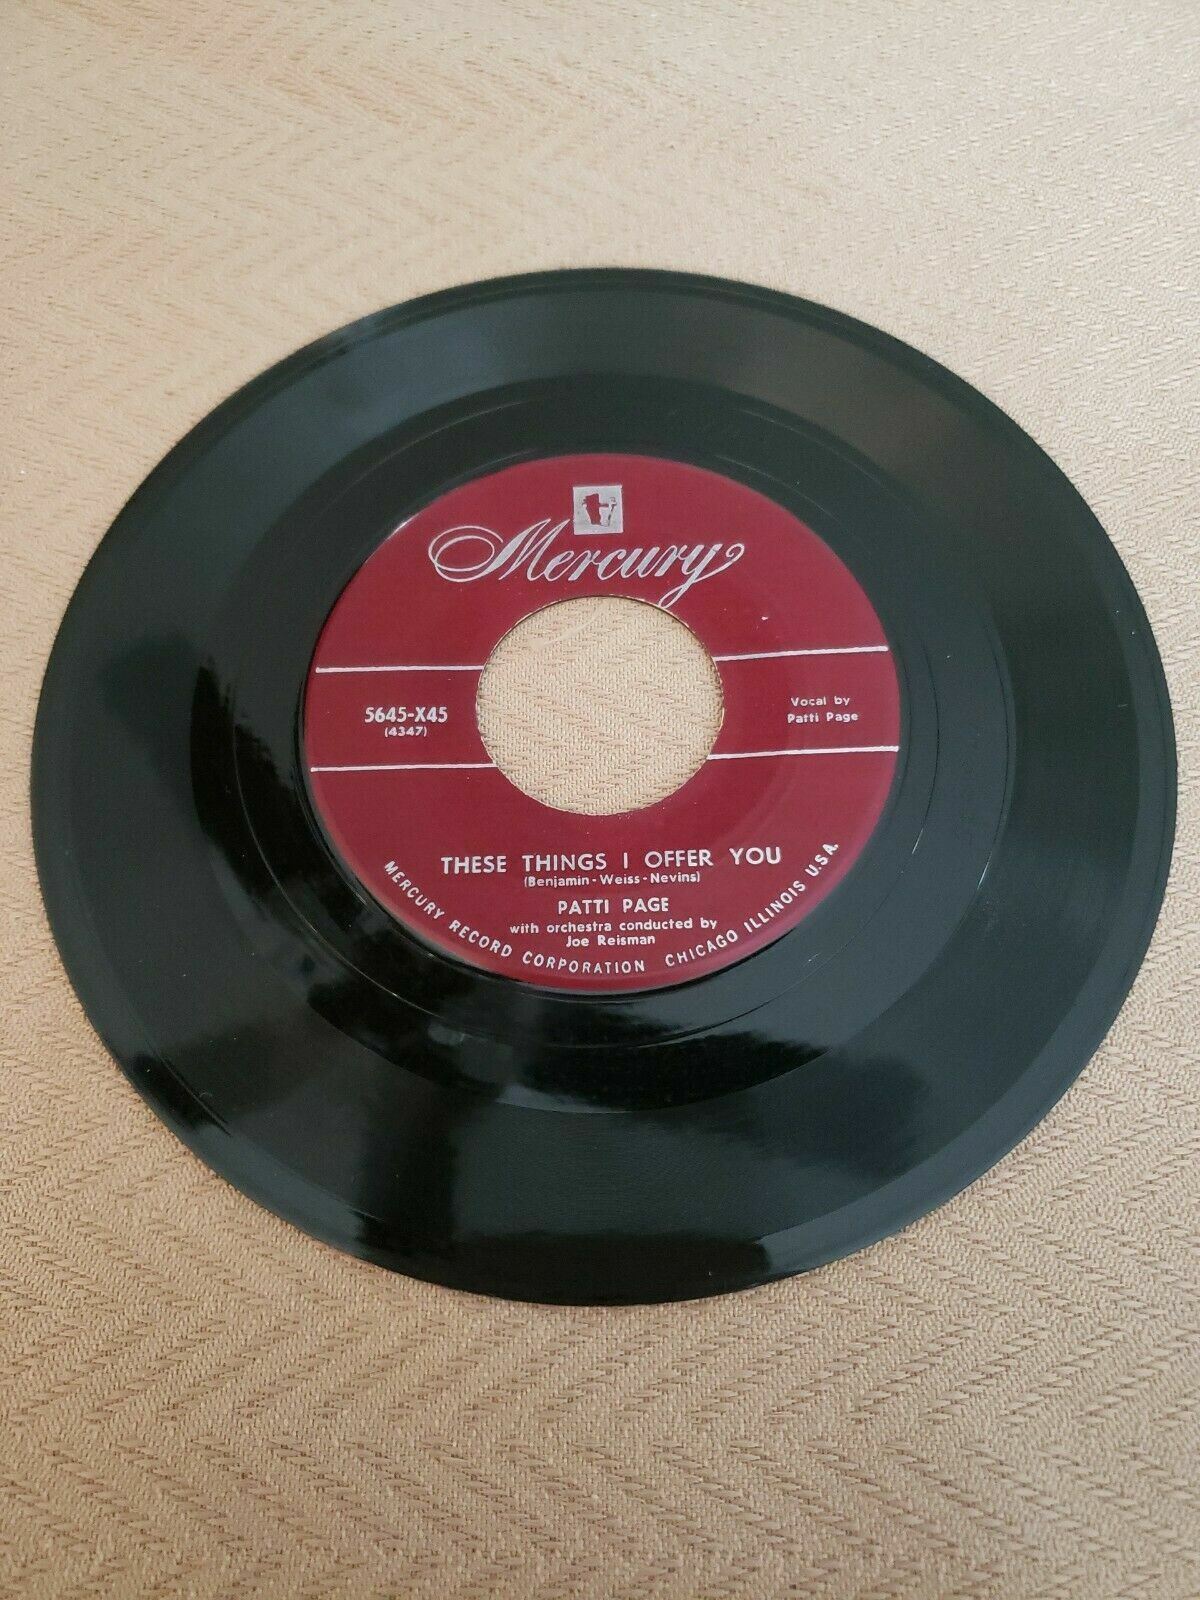 Patti Page - These Things I Offer You - Mercury (45RPM 7”Single) (J845) 